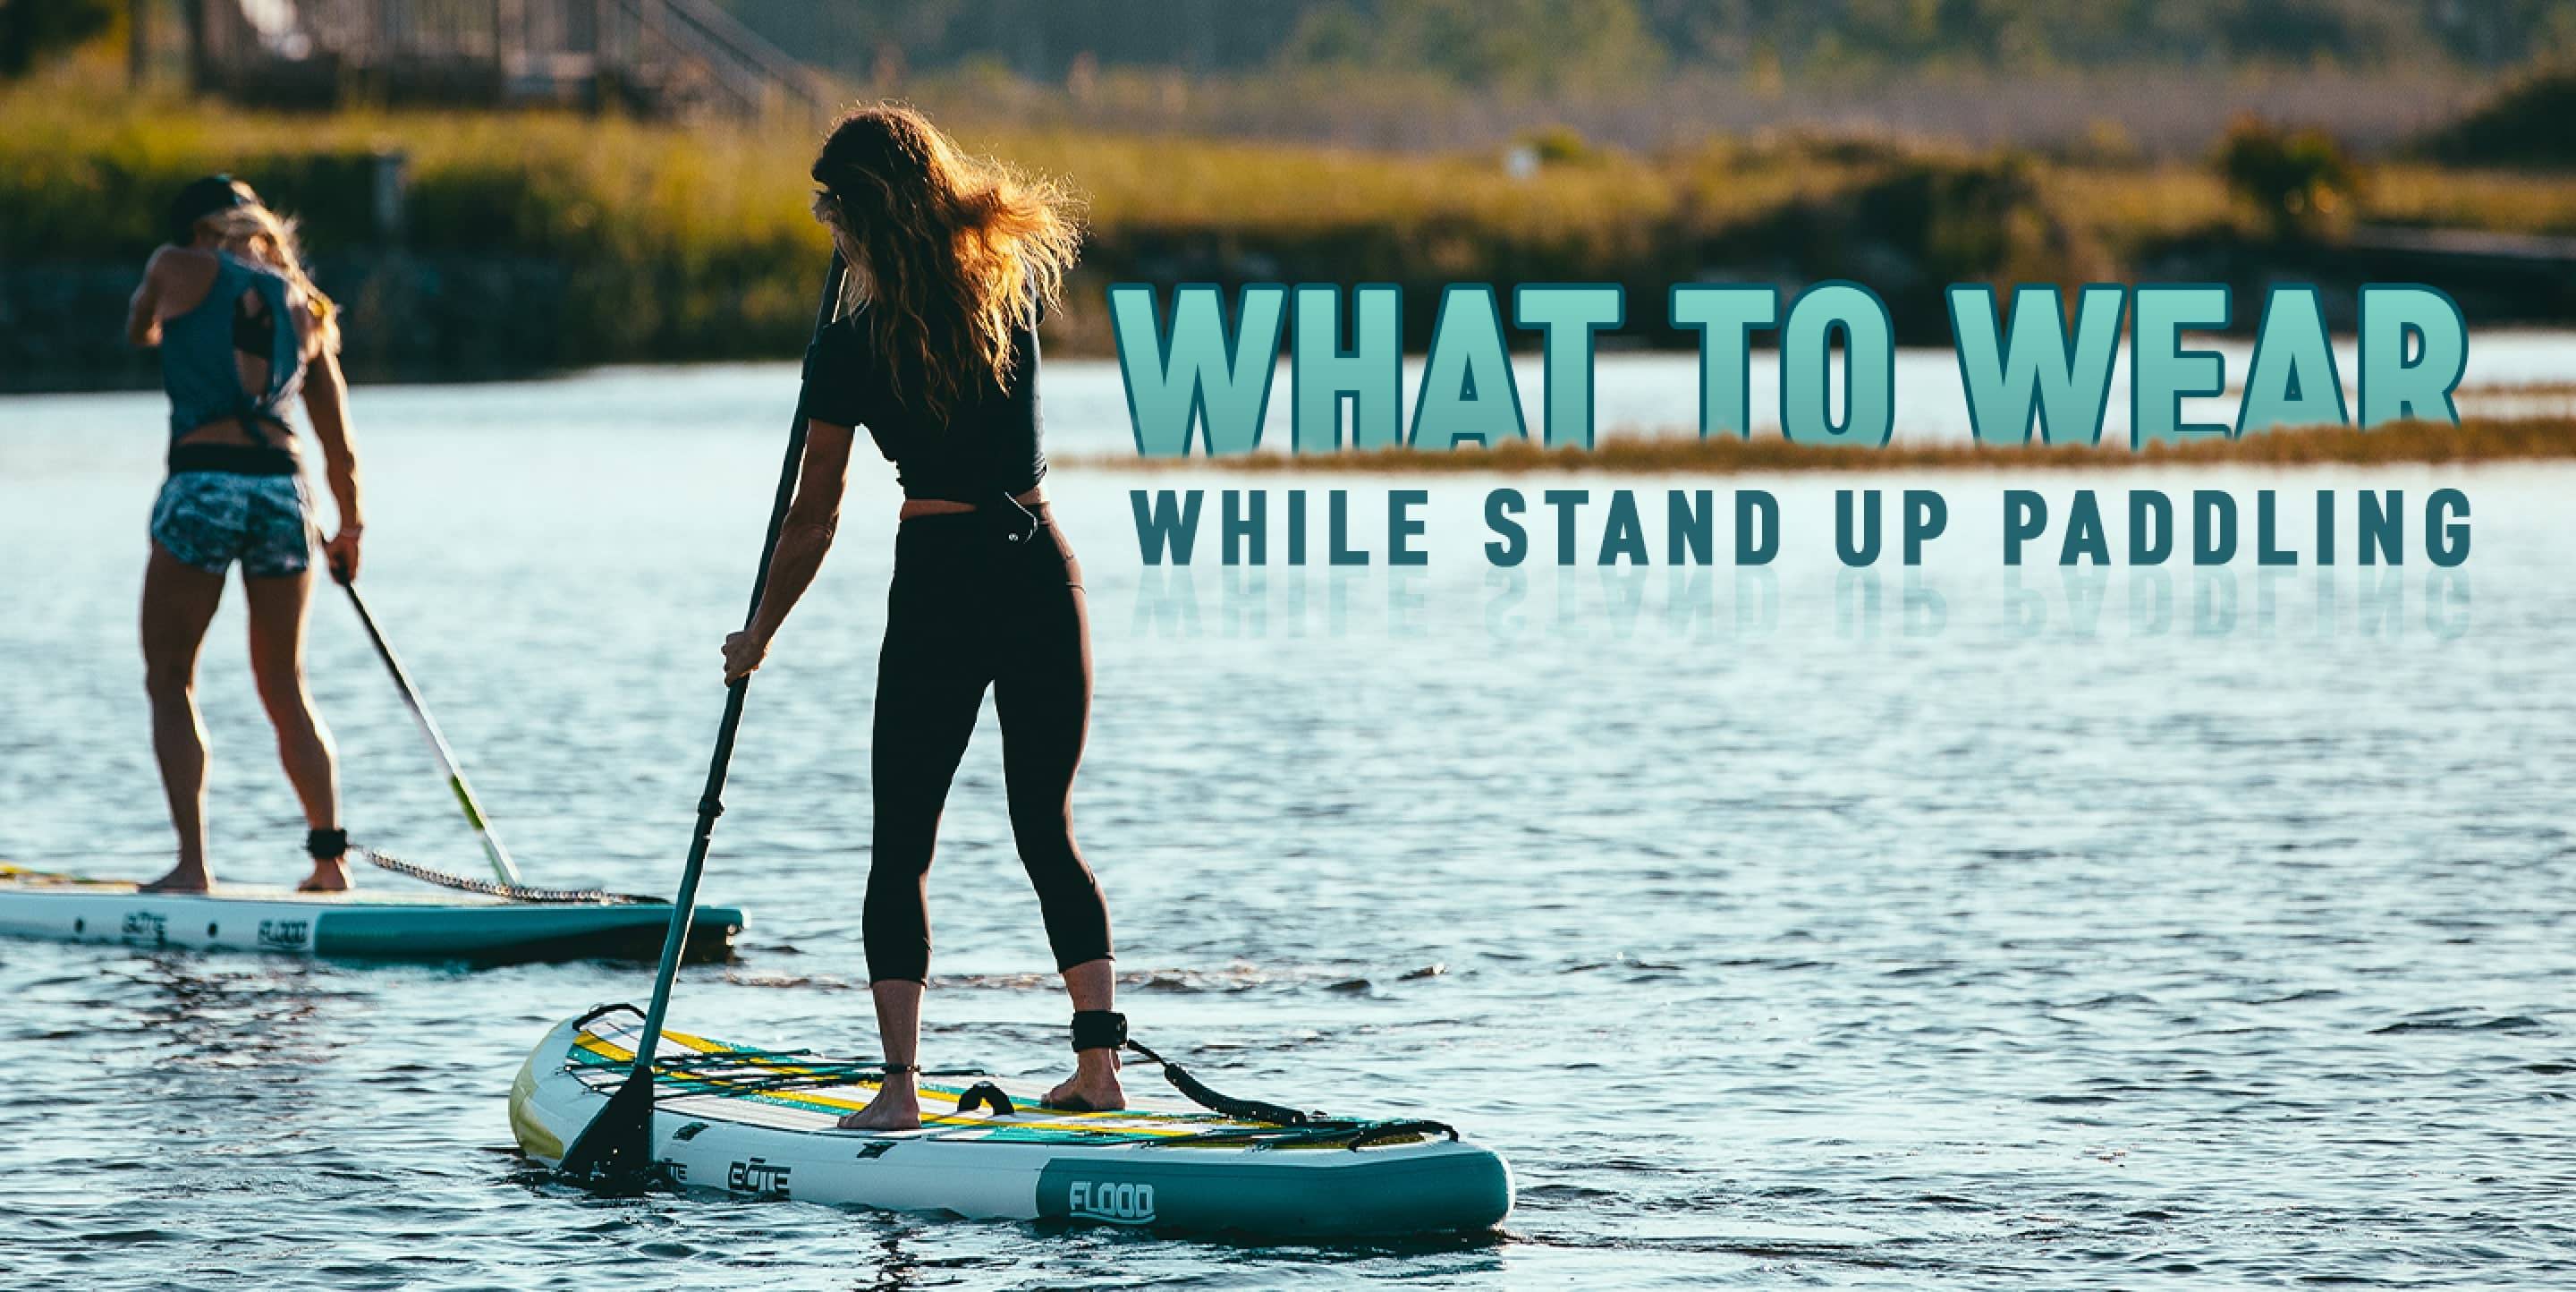 What to Wear While Stand Up Paddling